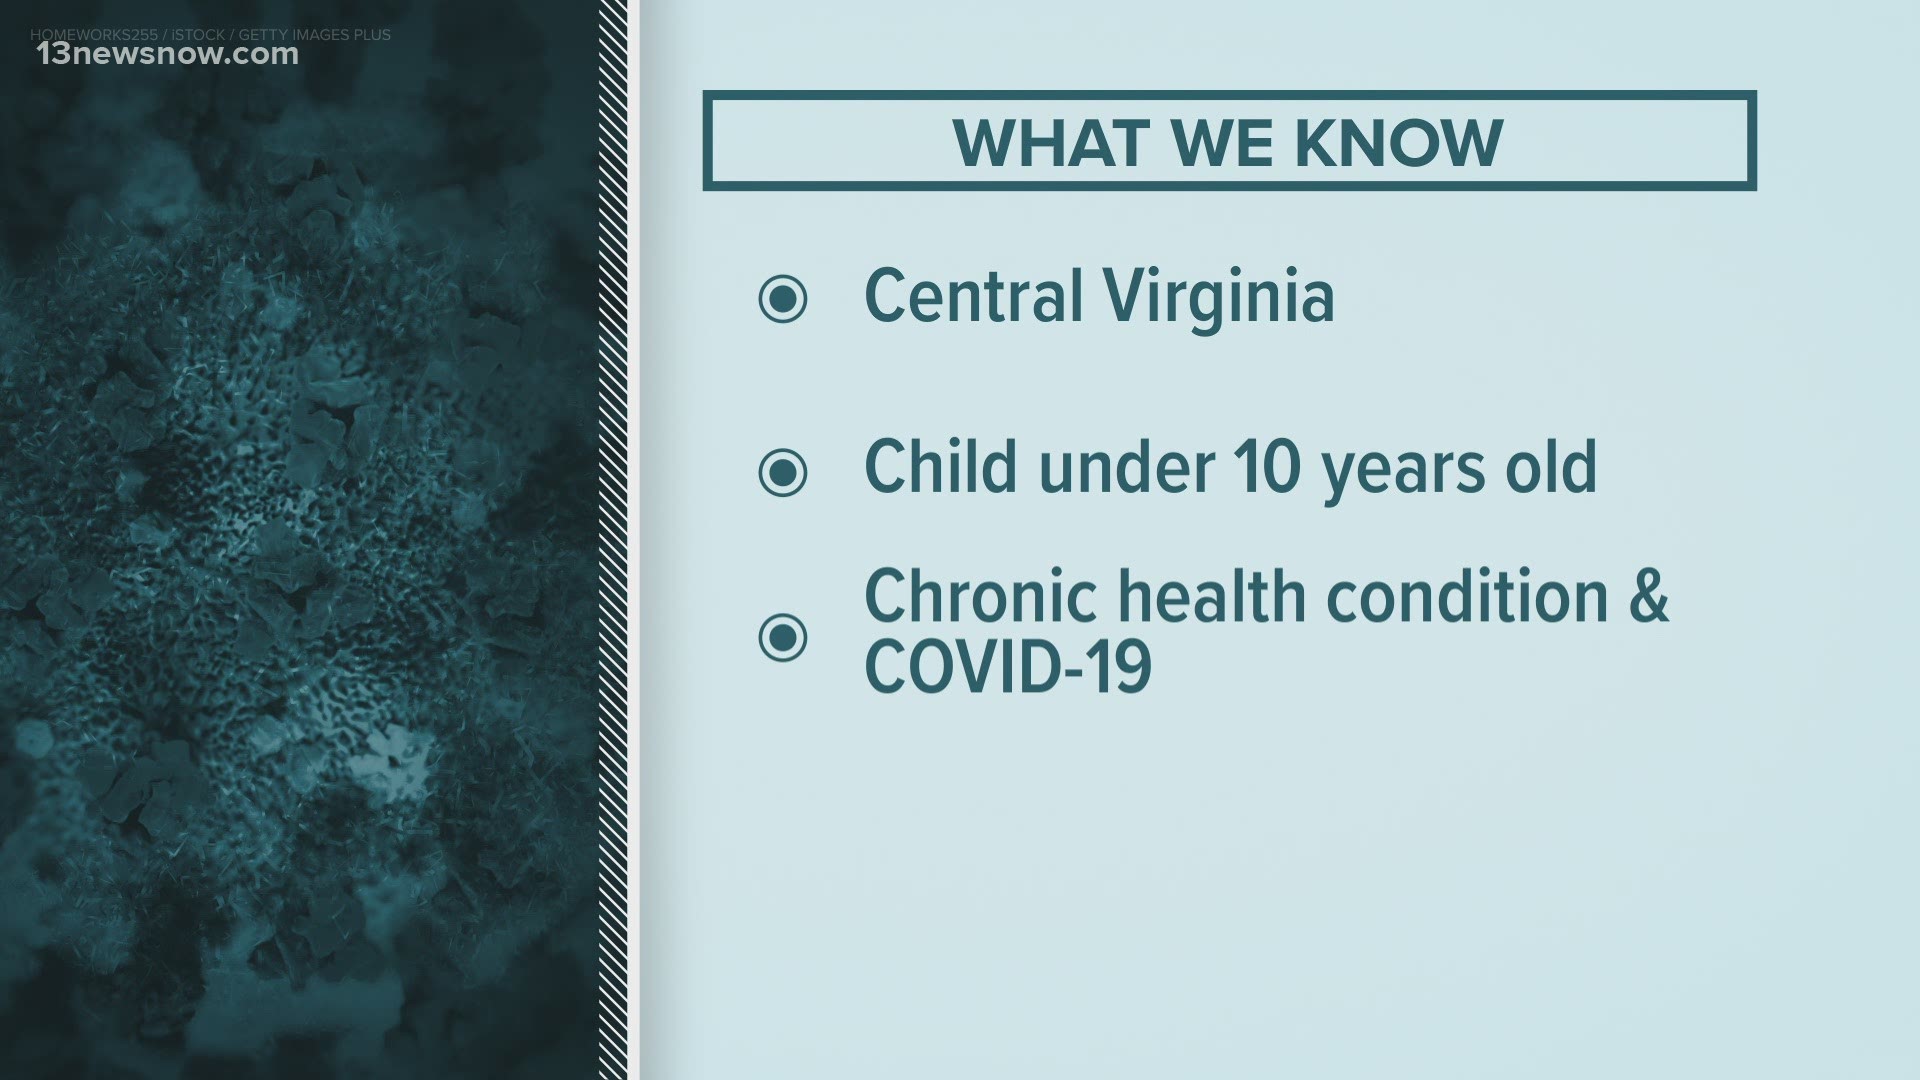 The child who died was in Central Virginia.